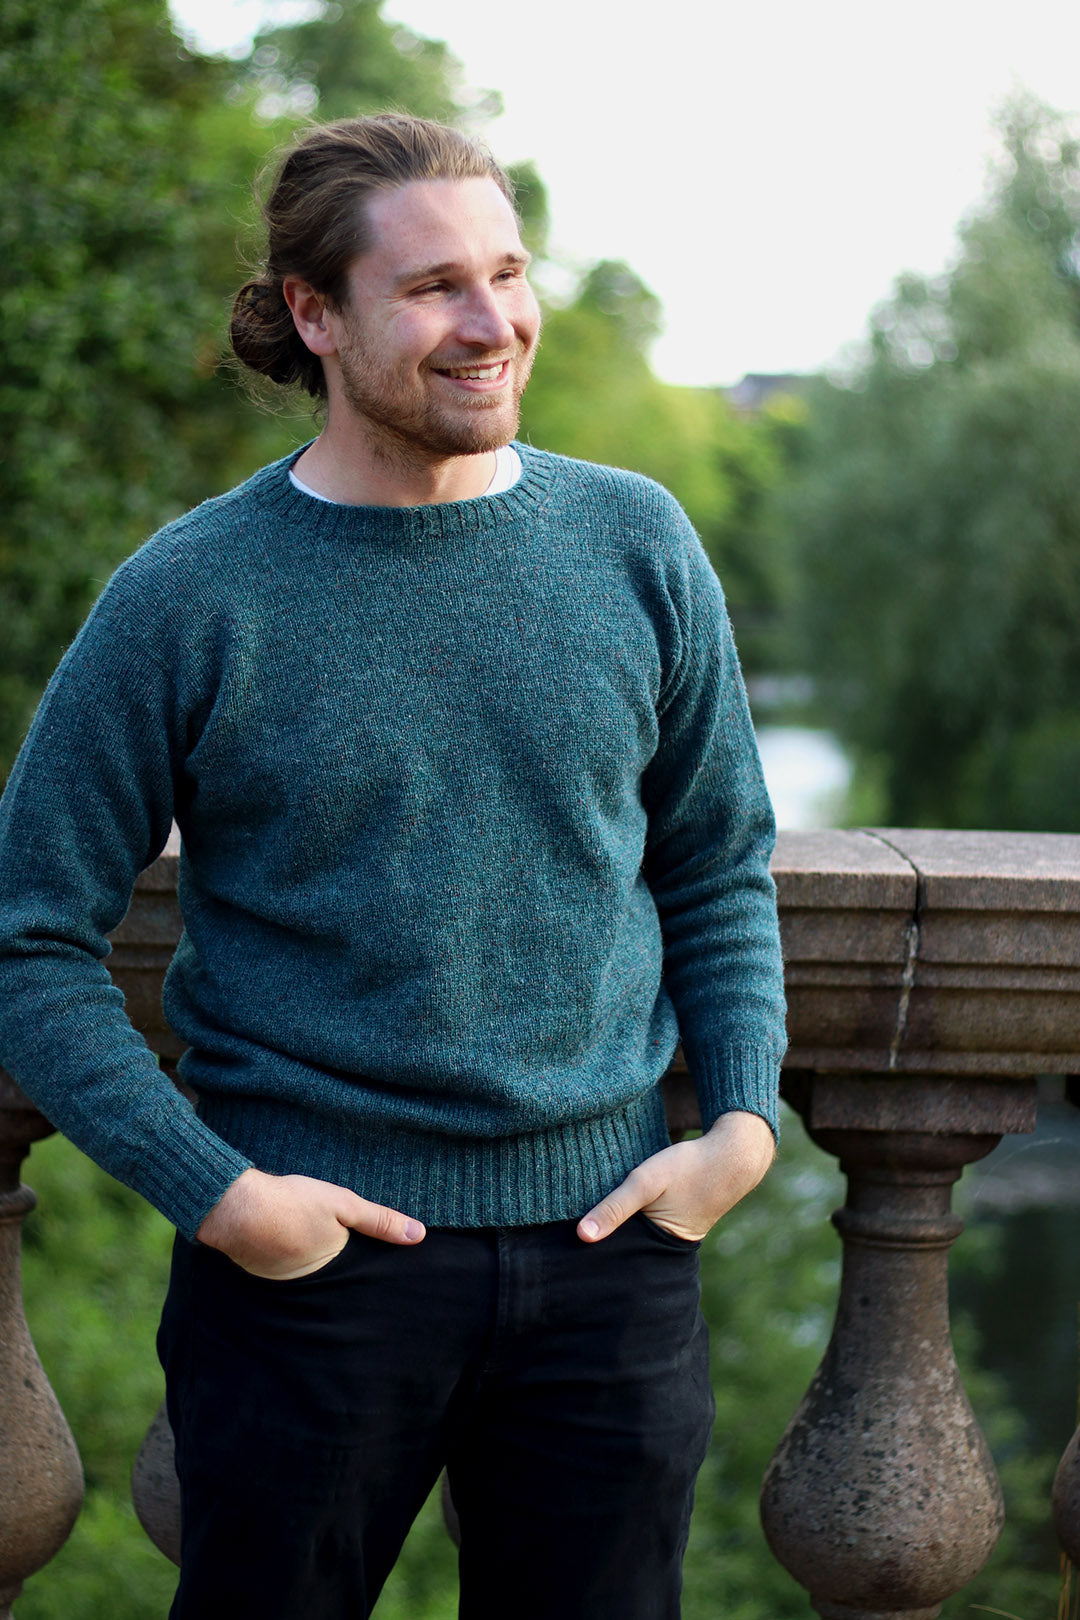 Made from authentic Shetland sheep wool from Jamieson's of Shetland, this beautifully knitted crew neck jumper comes in an ocean turquoise with subtle warm tones when looked at closely. Exclusive to the Scottish Textiles Showcase.